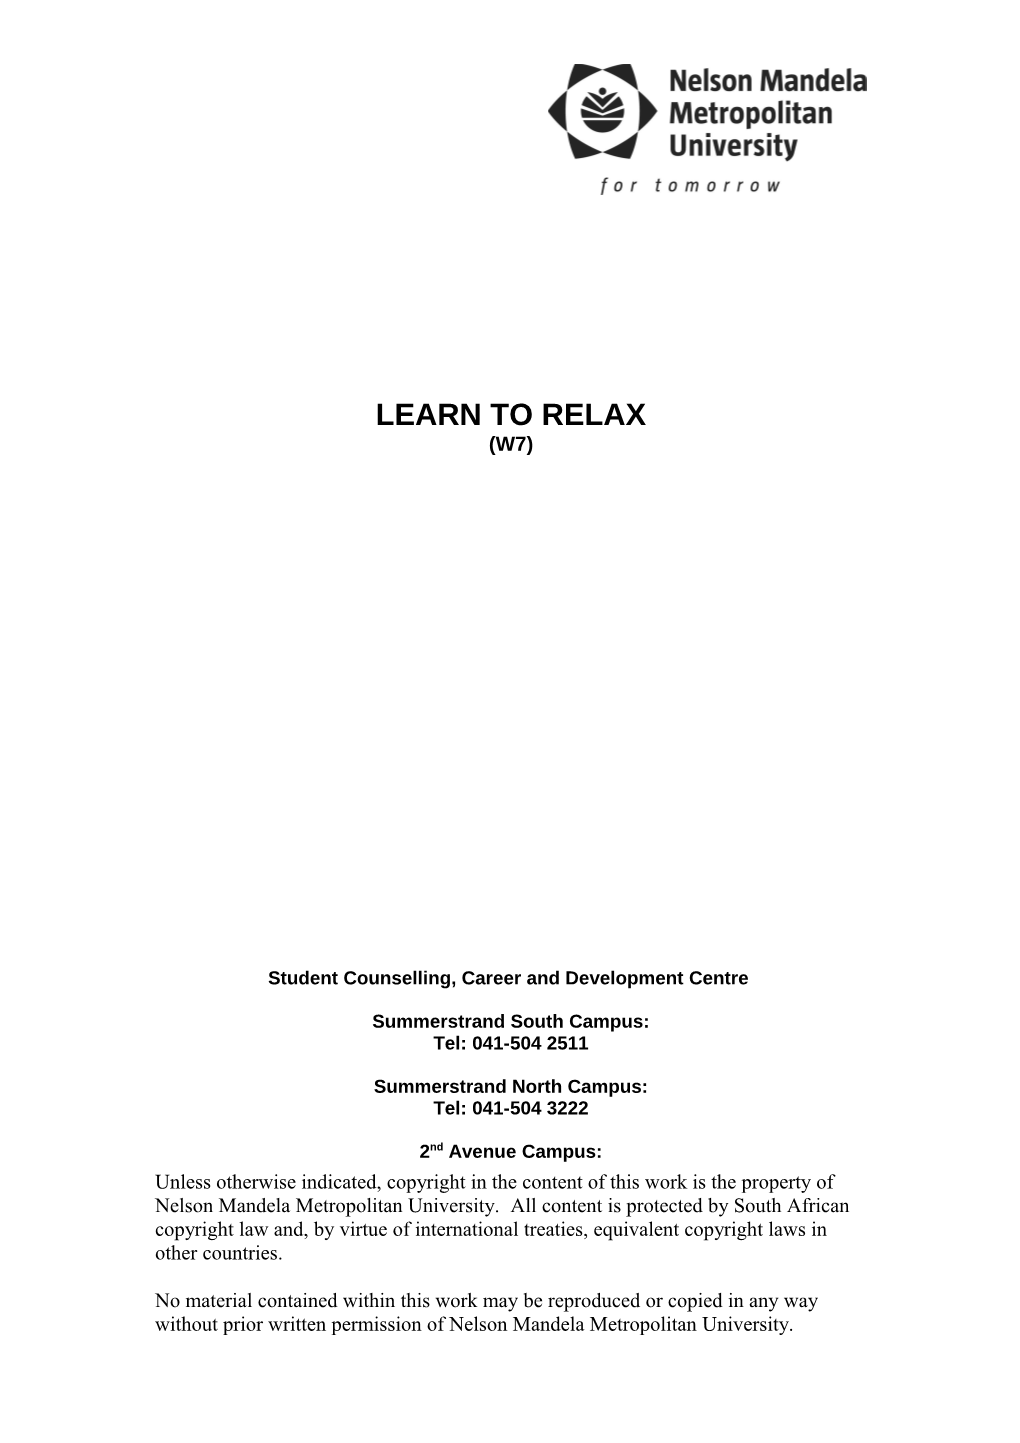 Chapter 5: Learn to Relax